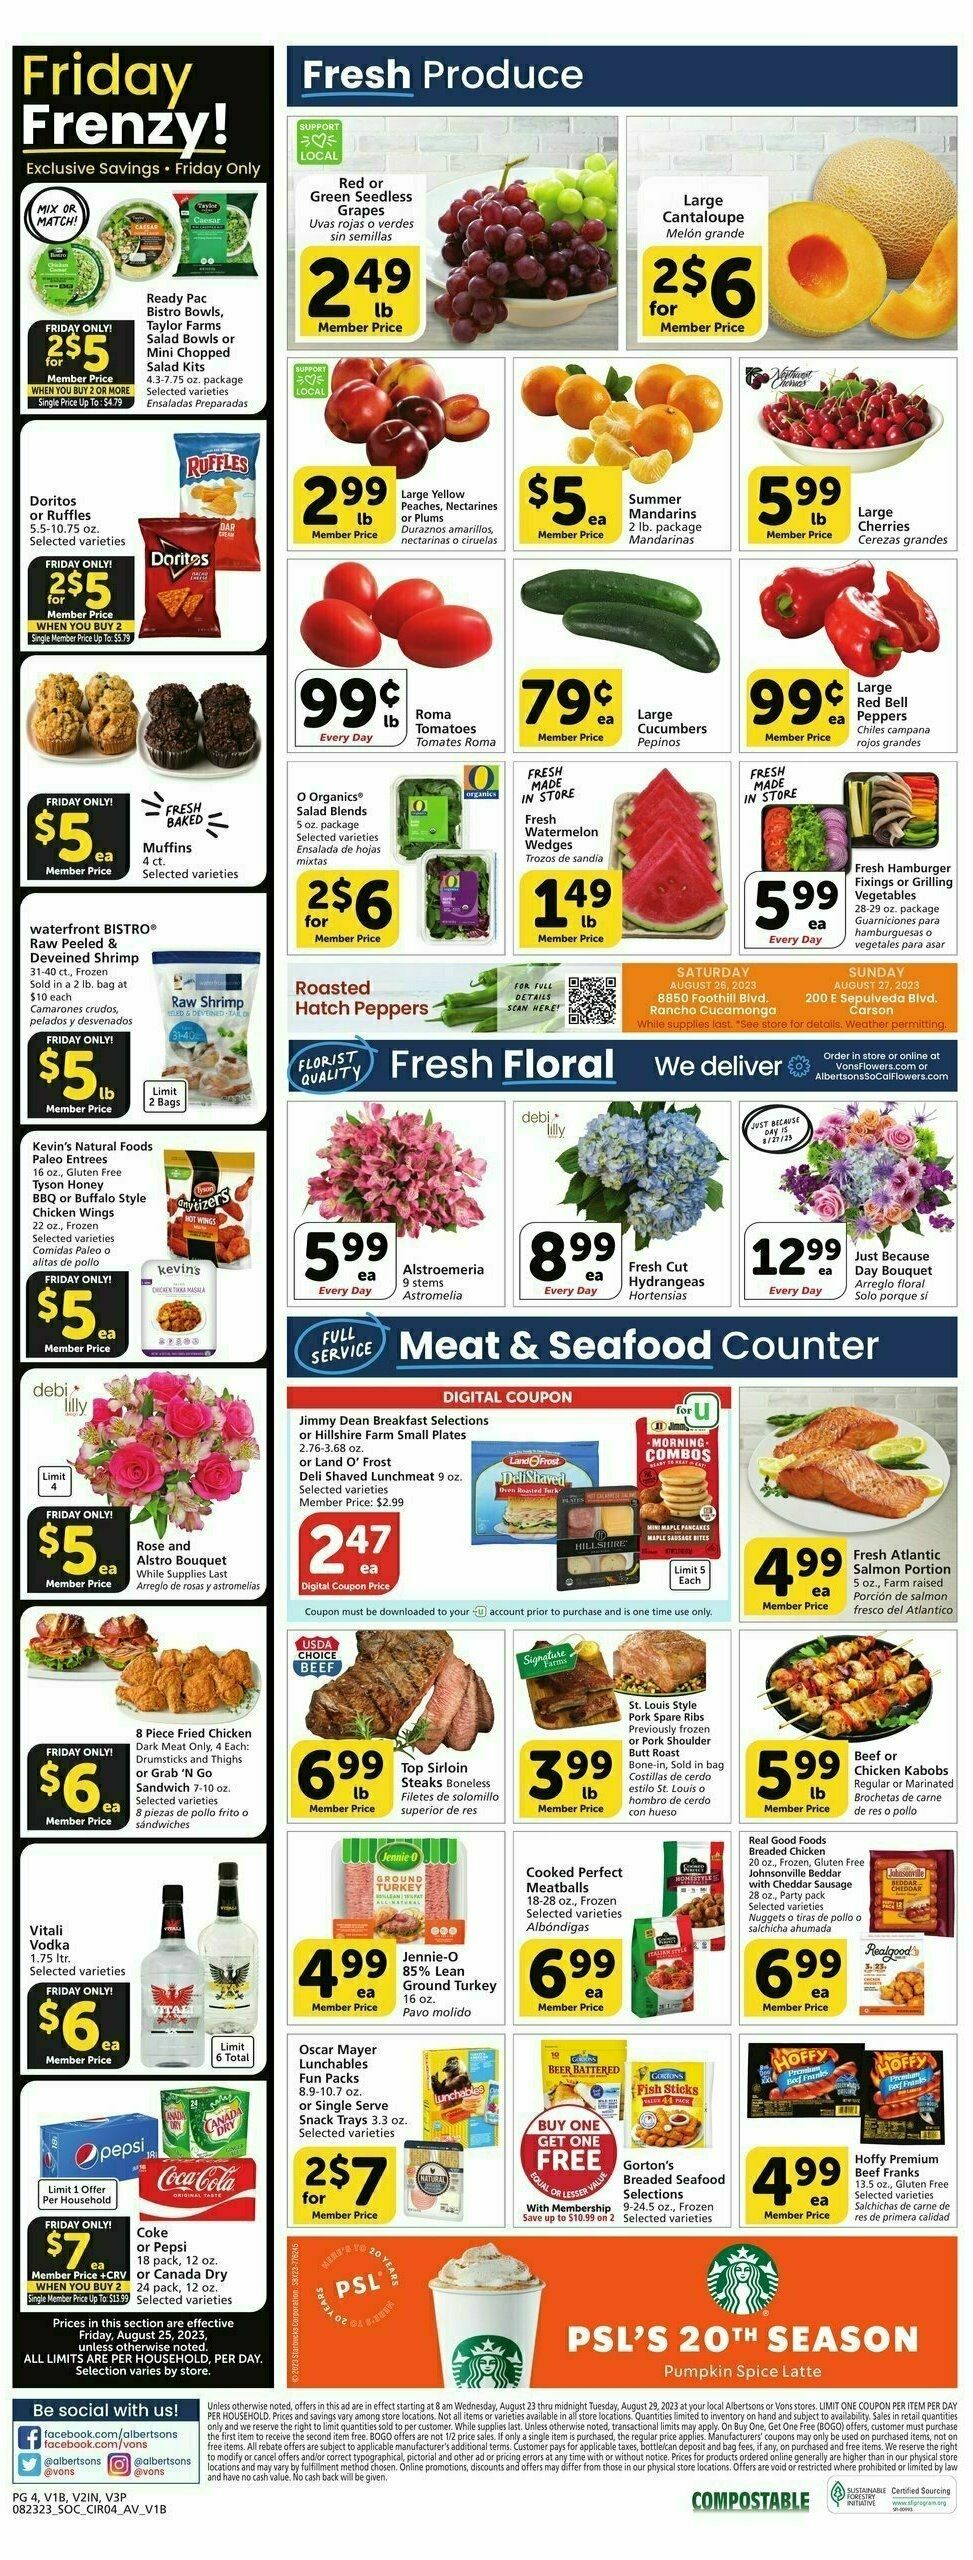 Vons Weekly Ad from August 23